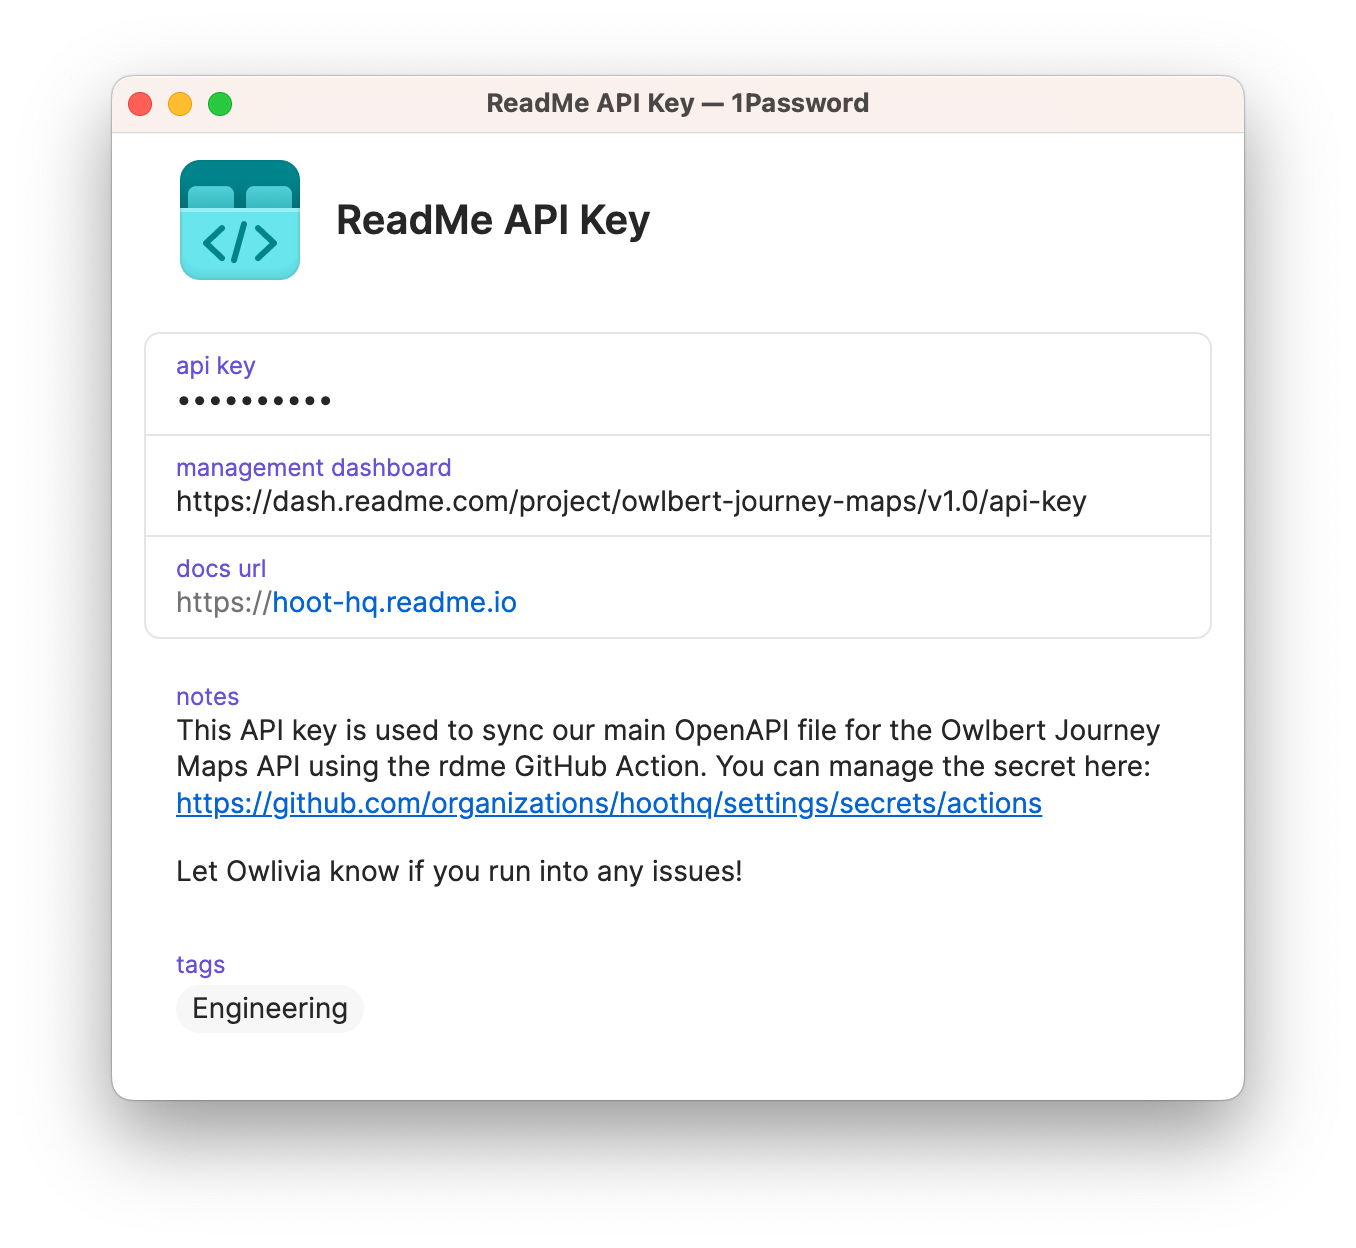 Authenticating Into ReadMe’s CLI With 1Password and Your Fingerprint ☝️